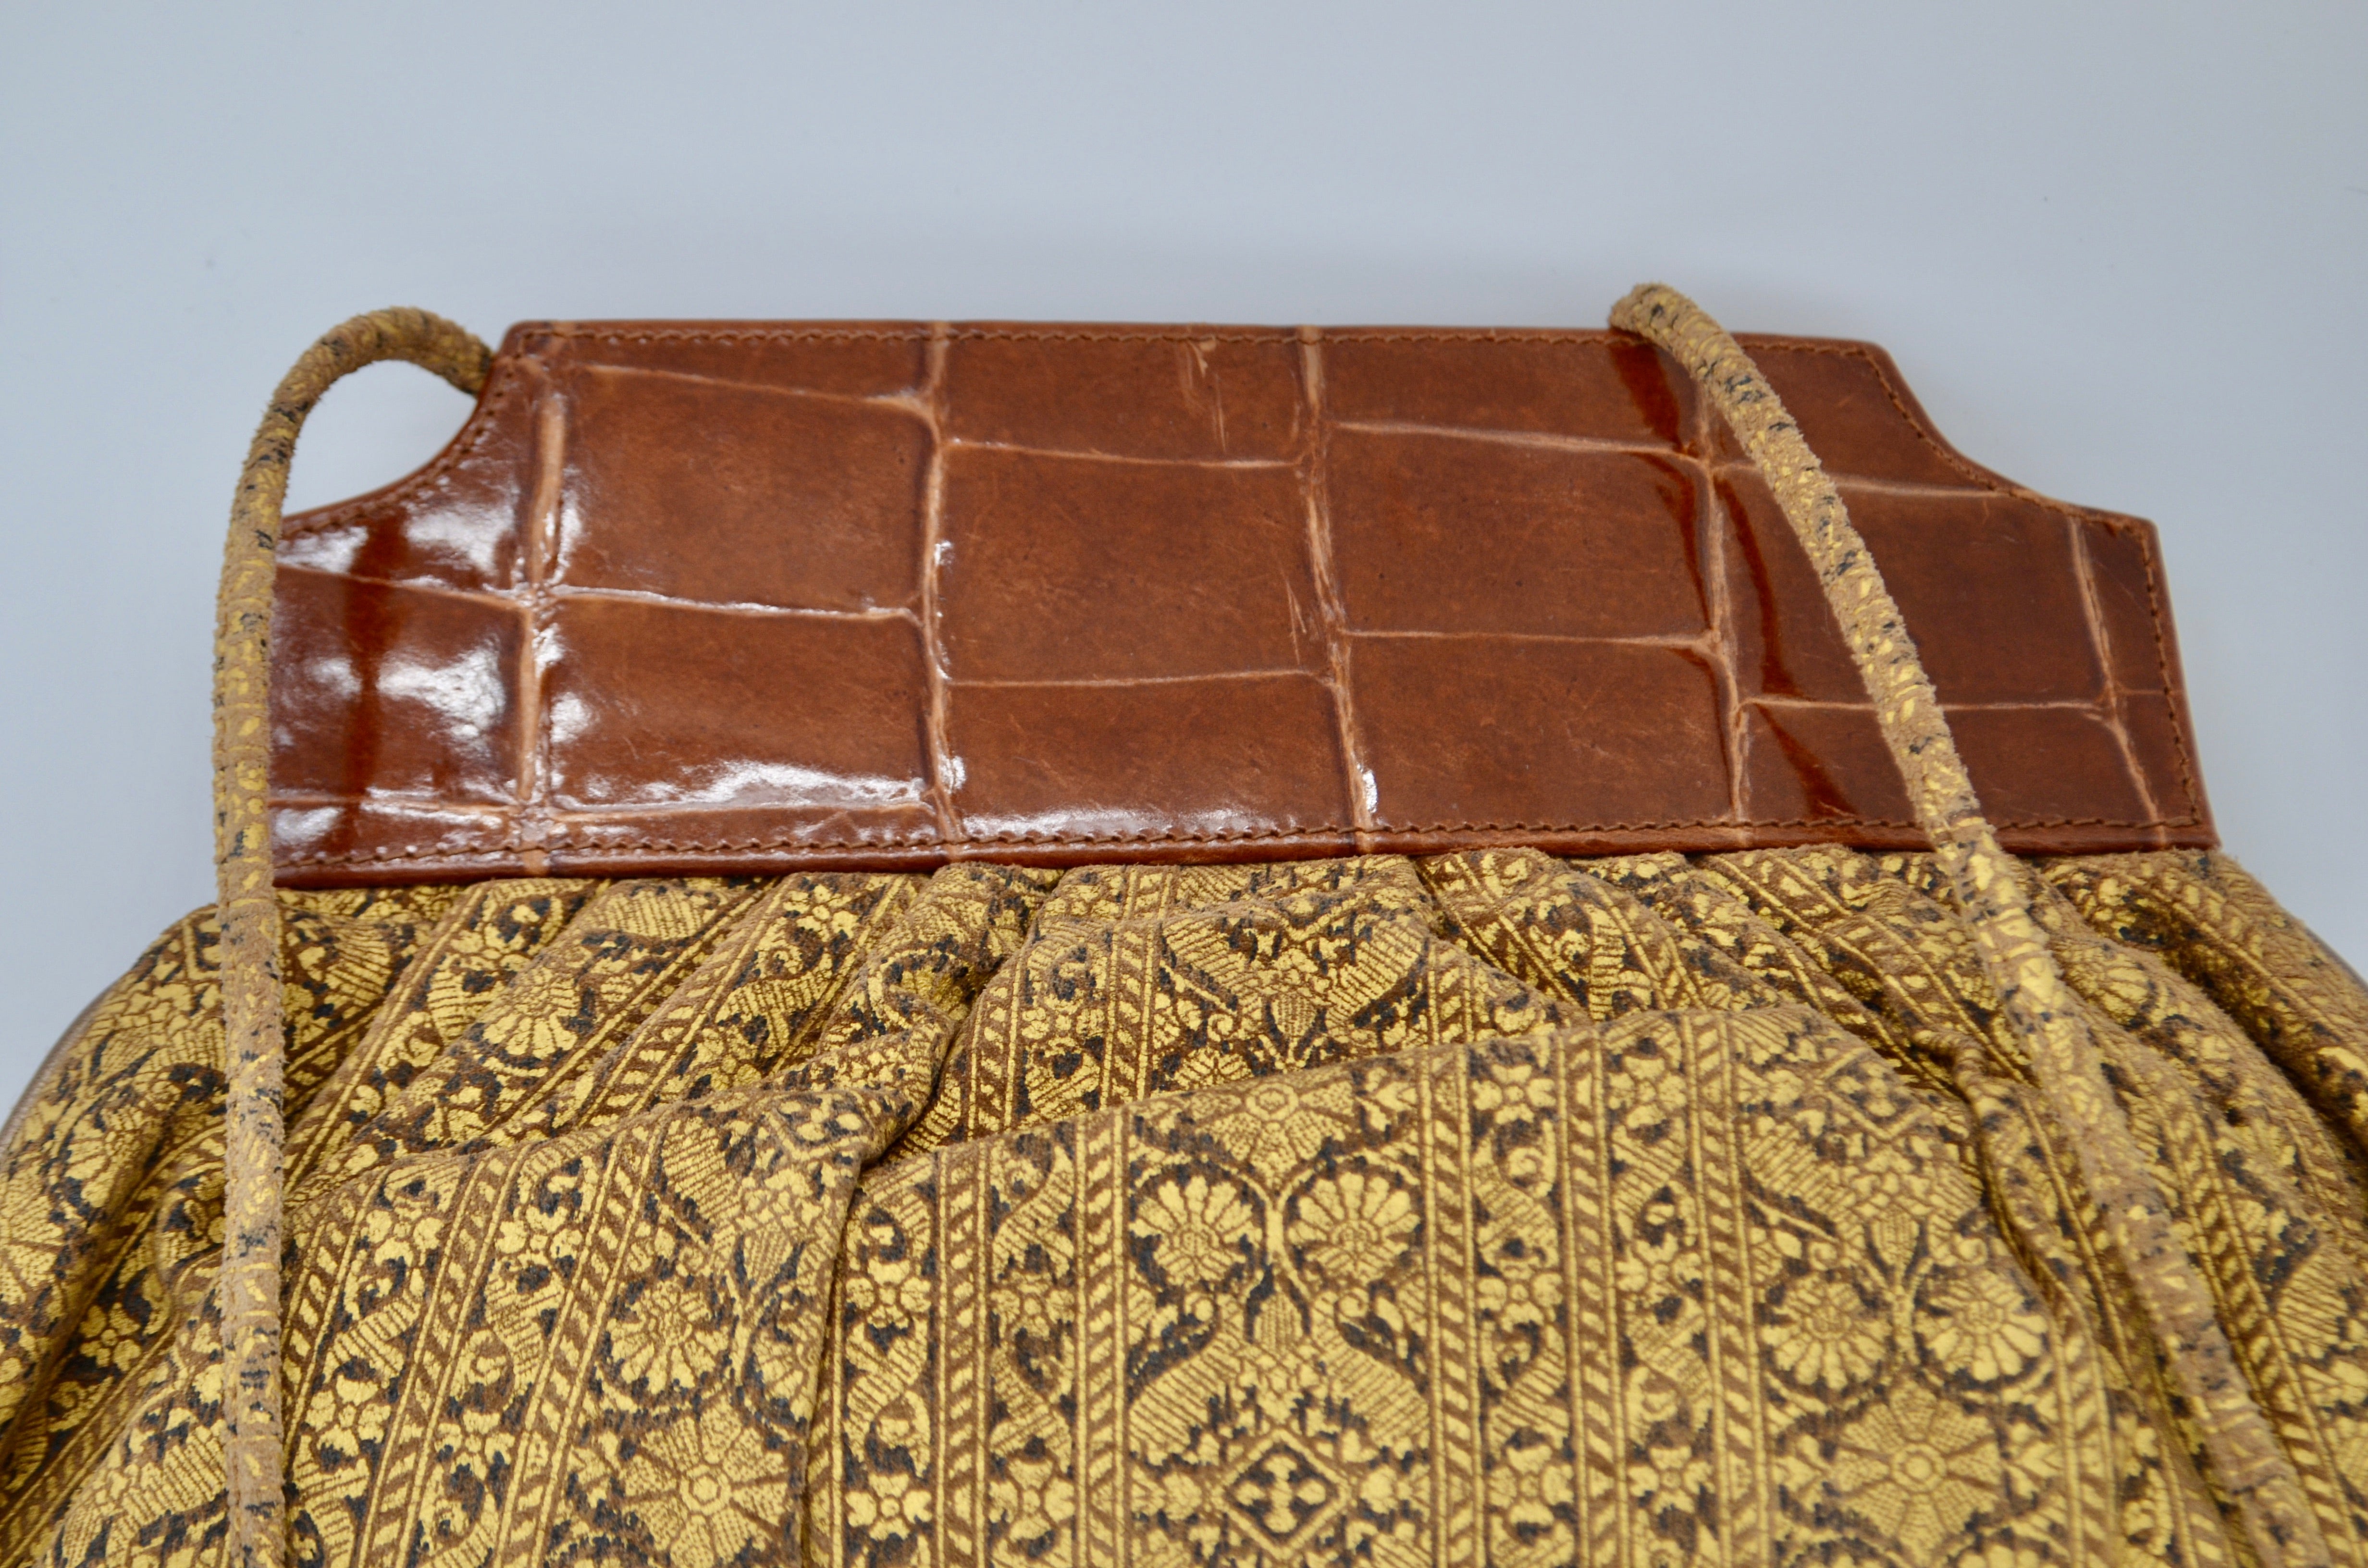 Vintage 80’s “BRACCIALINI” Upholstery Fabric Medallion Leather Shoulder Clutch Bag Made in Italy